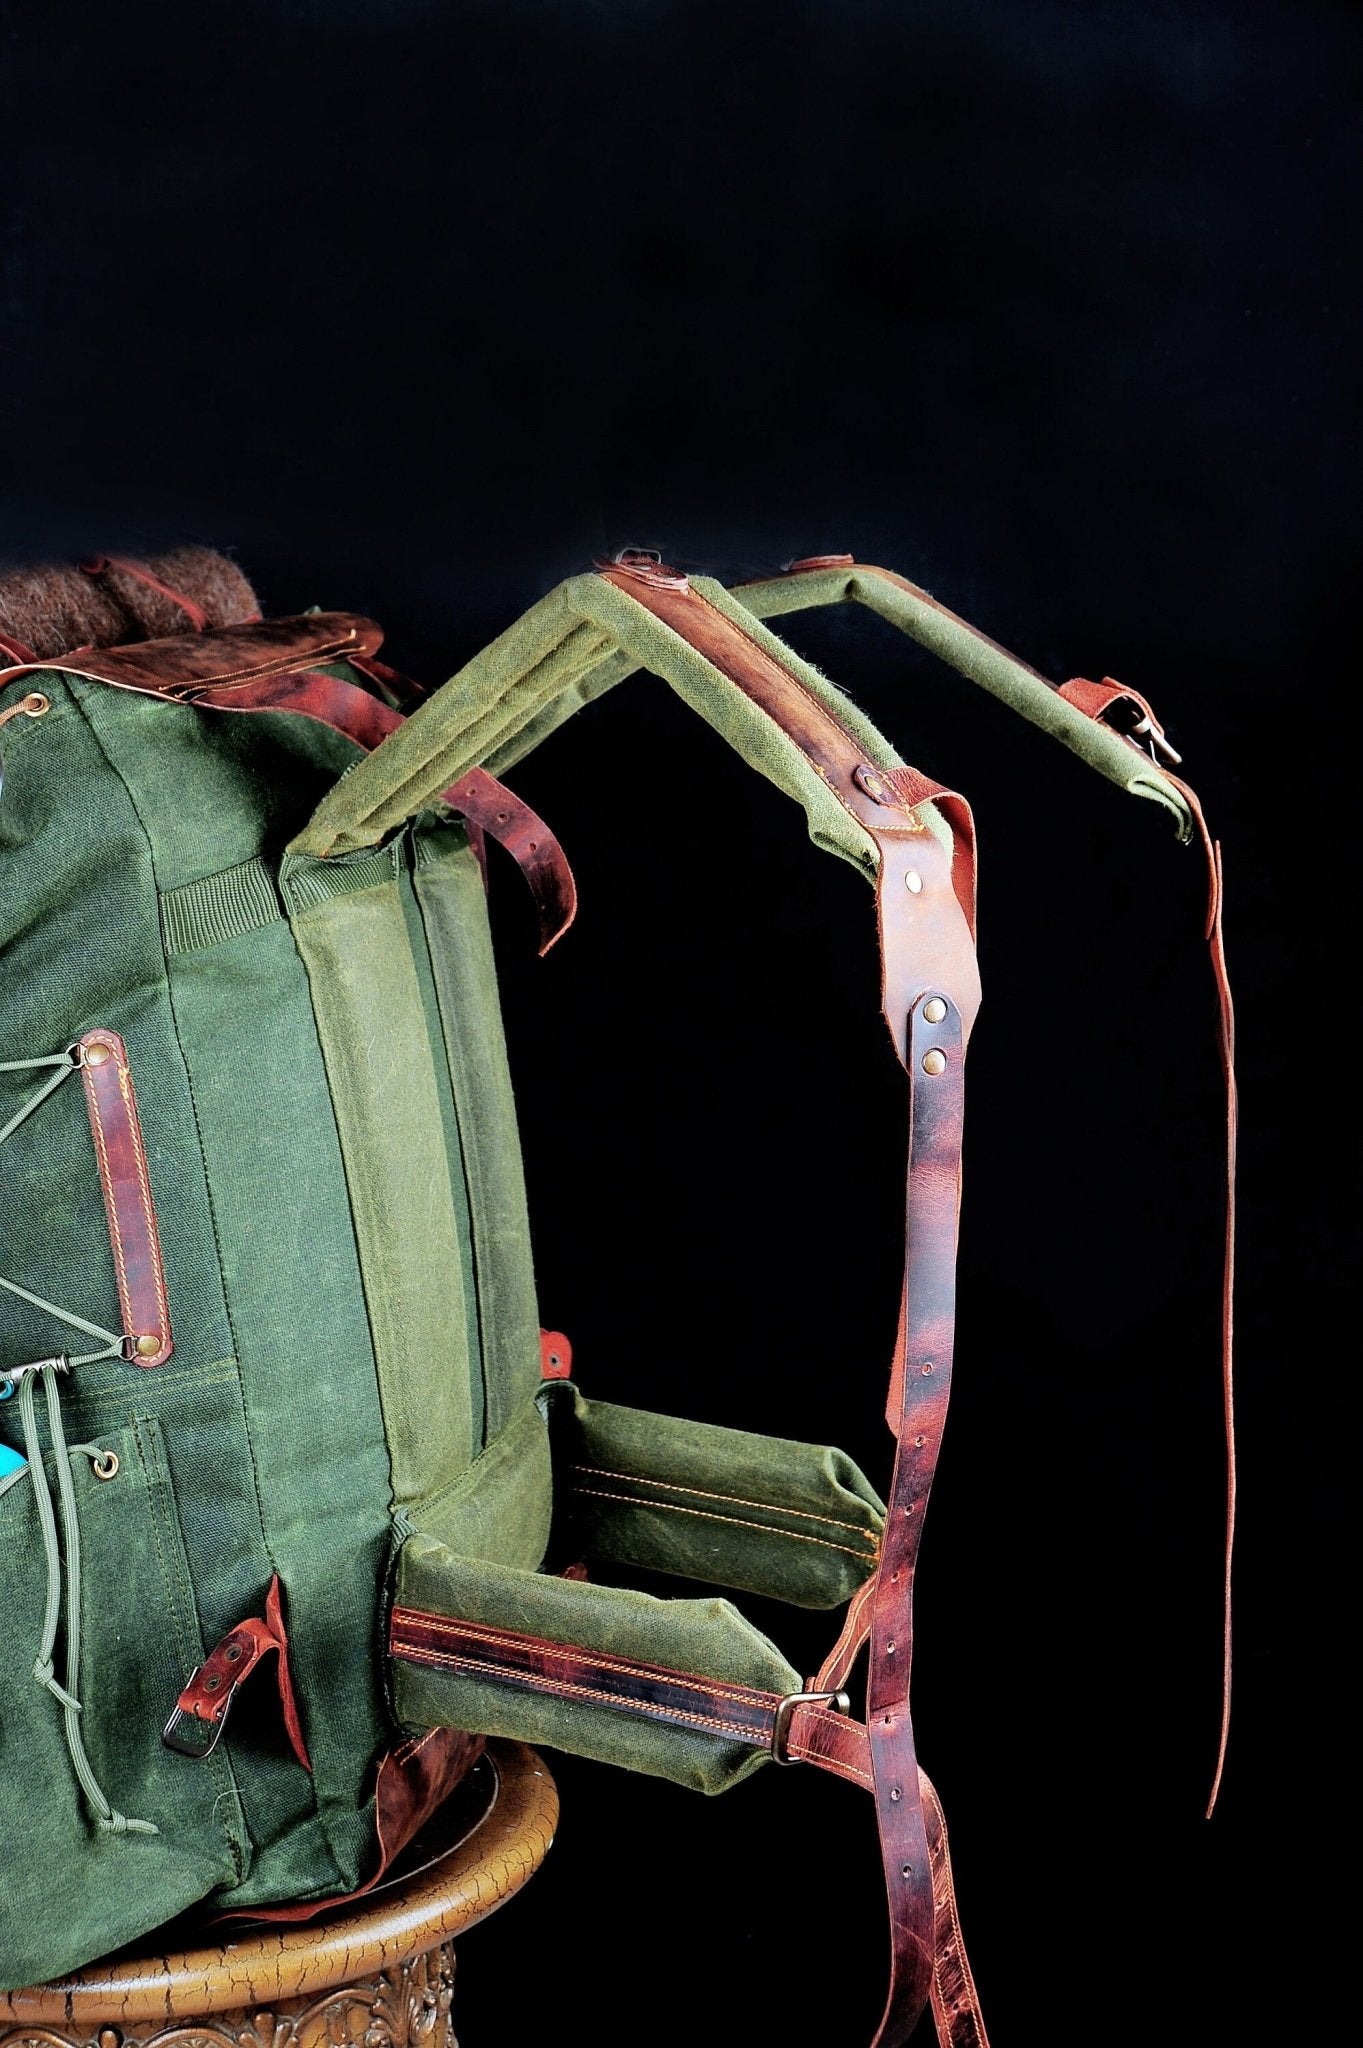 Green Bestseller | Leather Backpack | Waxed Canvas Bag | Travel | Bushcraft | Camping | Green, Brown Options | 50 Liters | Personalization bushcraft - camping - hiking backpack 99percenthandmade   